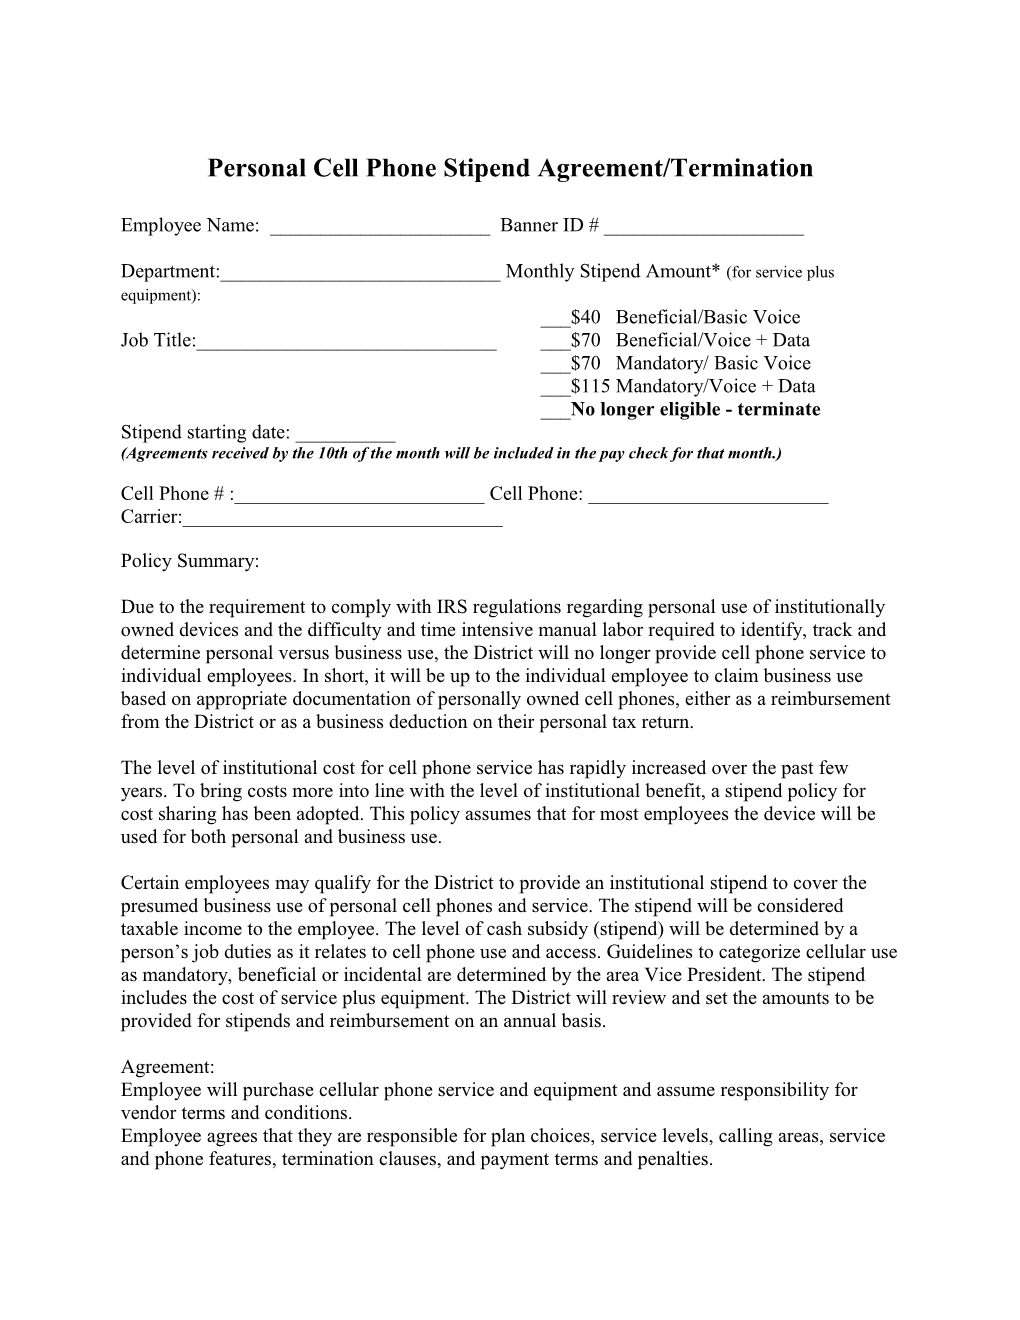 Personal Cell Phone Stipend Agreement/Termination